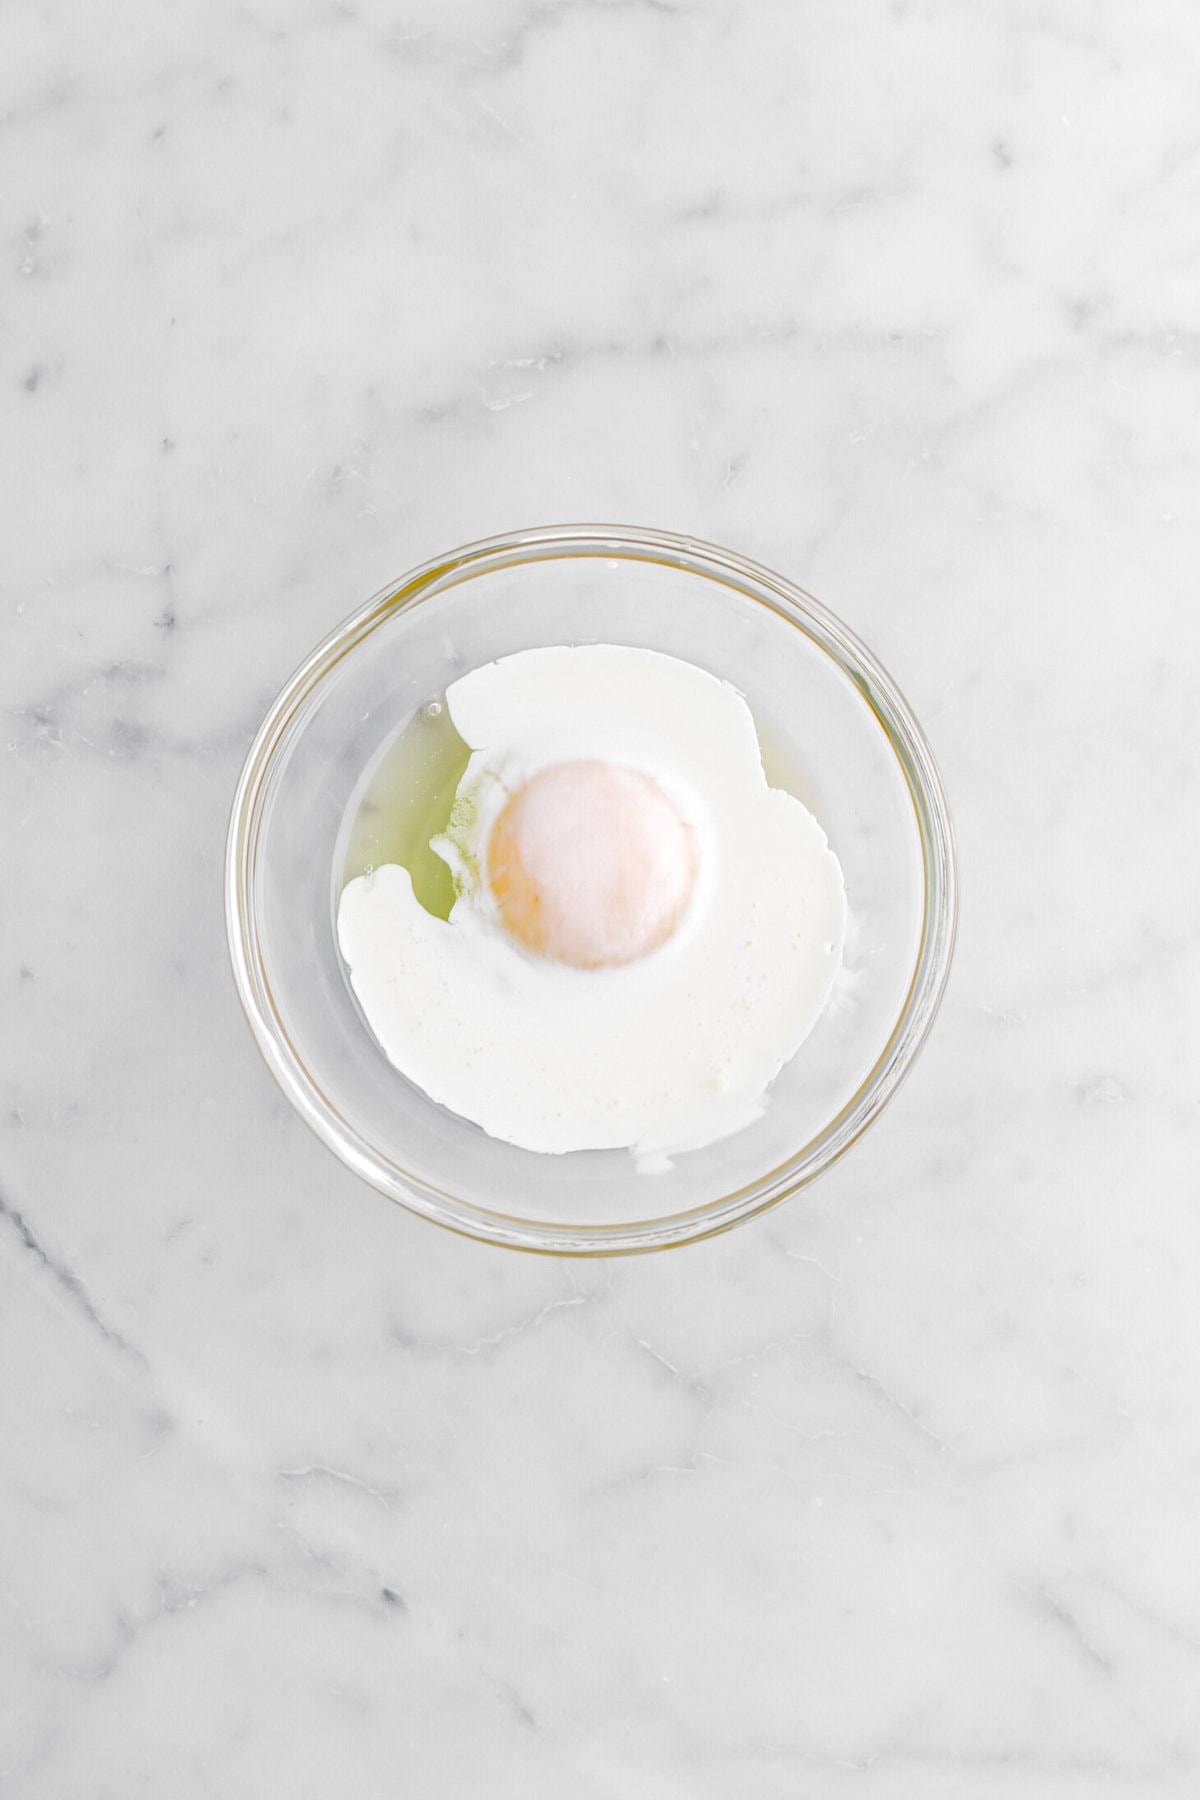 egg and cream in glass bowl.